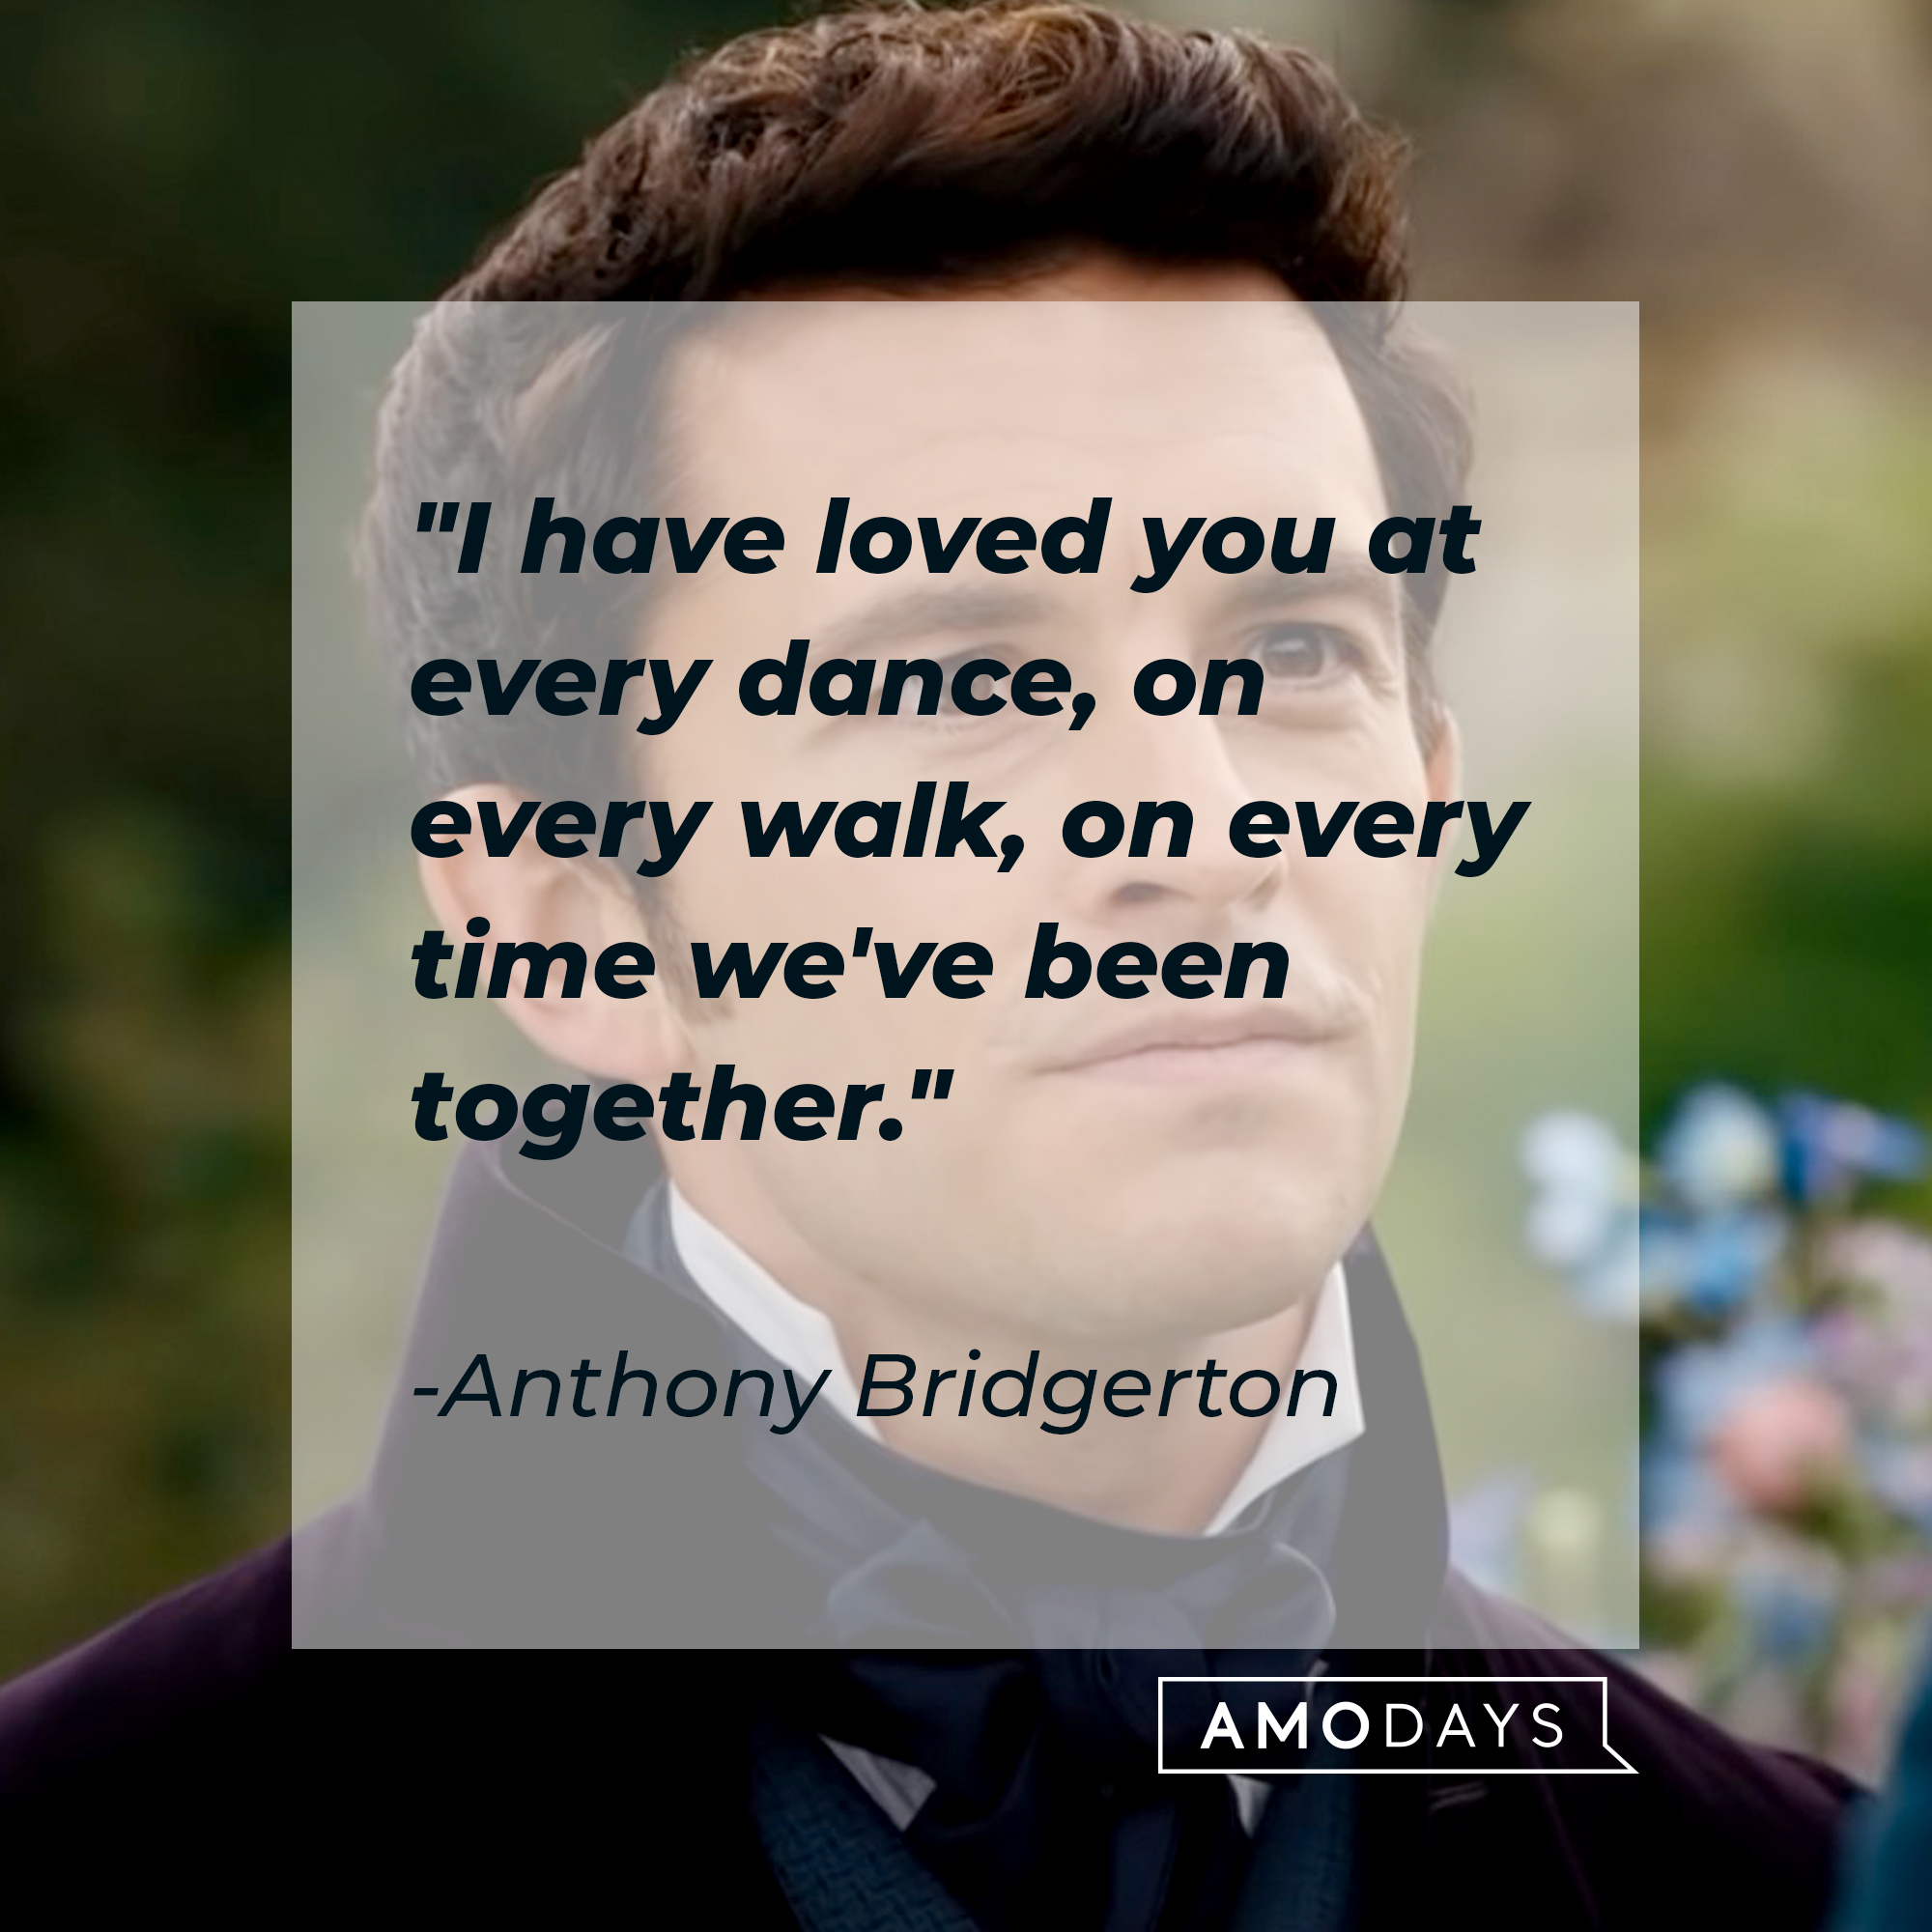 An image of Anthony Bridgerton with his quote: “I have loved you at every dance, on every walk, and every time we've been together. You must feel it in your heart, because I do."│ youtube.com/Netflix